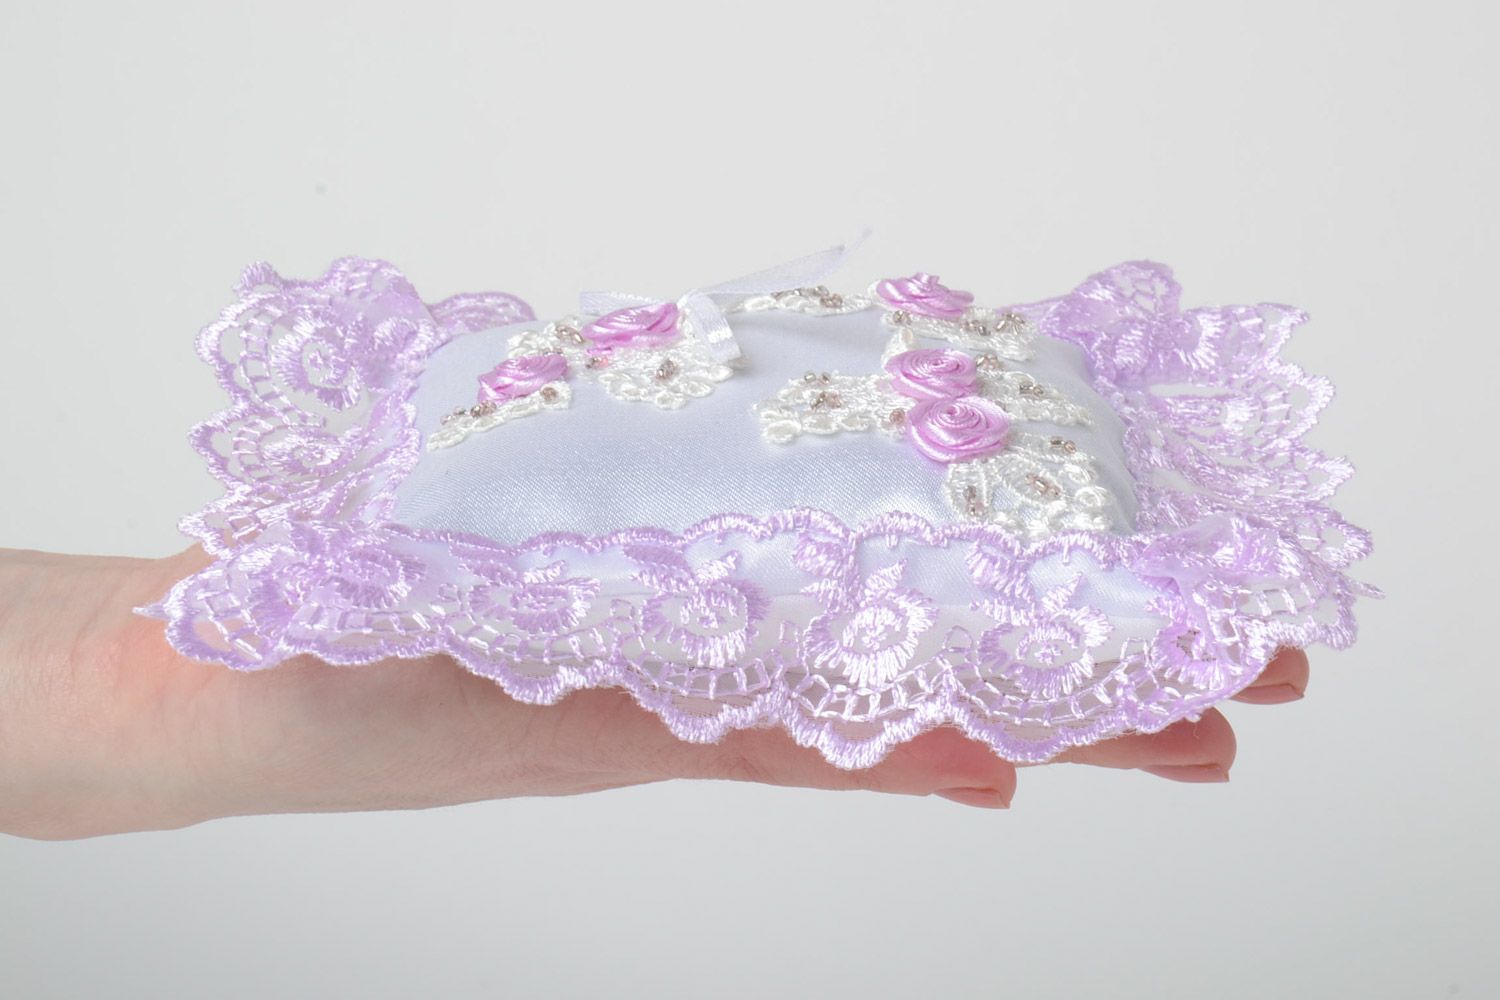 Handmade wedding rings pillow with lace and beads in white and lavender colors photo 5